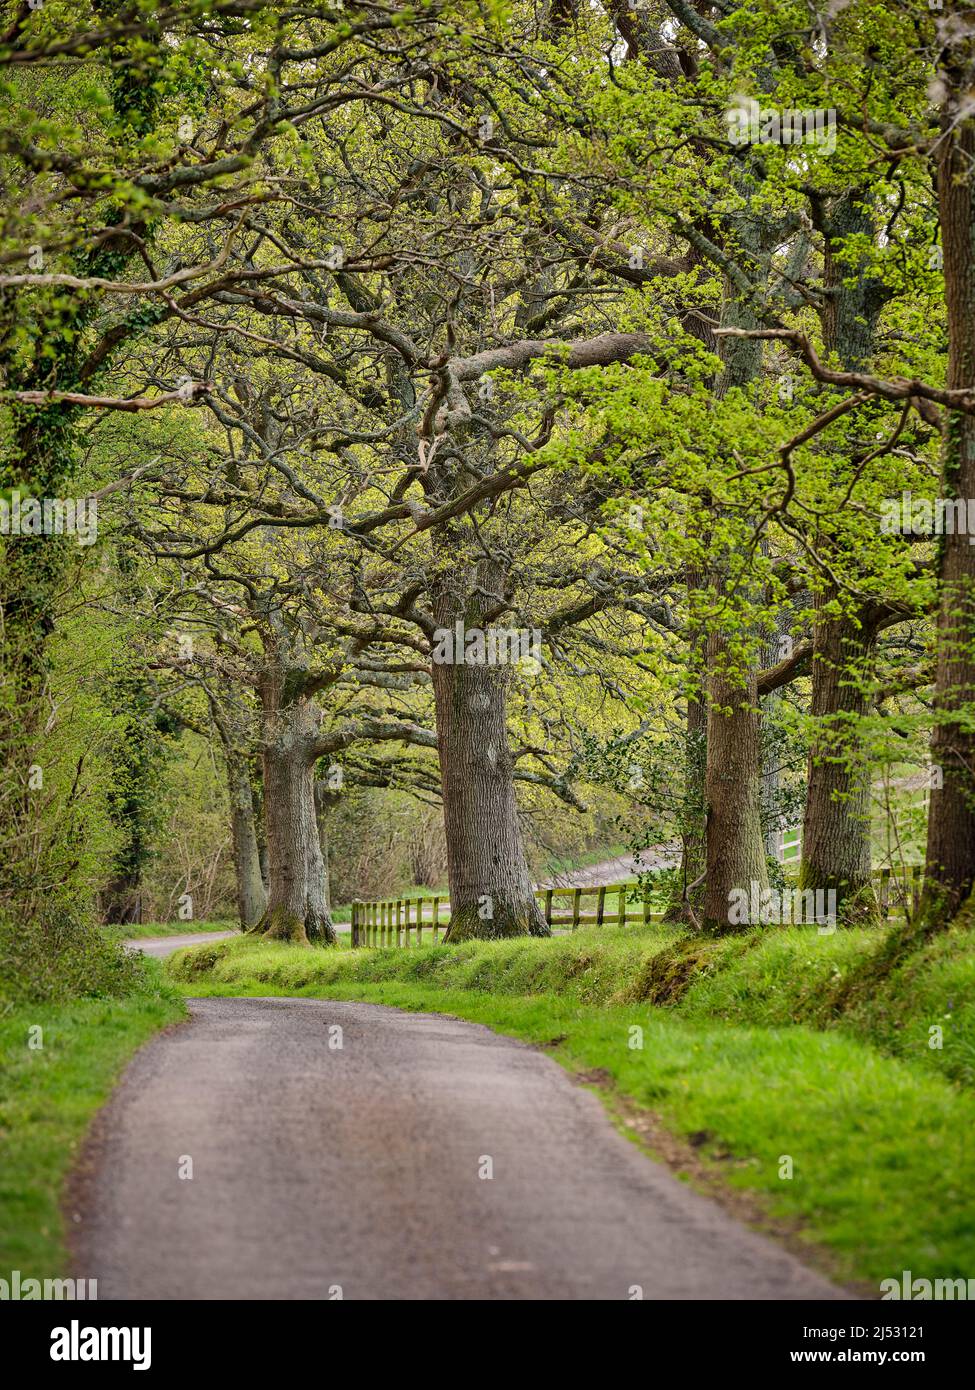 A picturesque country lane lined with trees near the West Sussex village of Graffham. Stock Photo